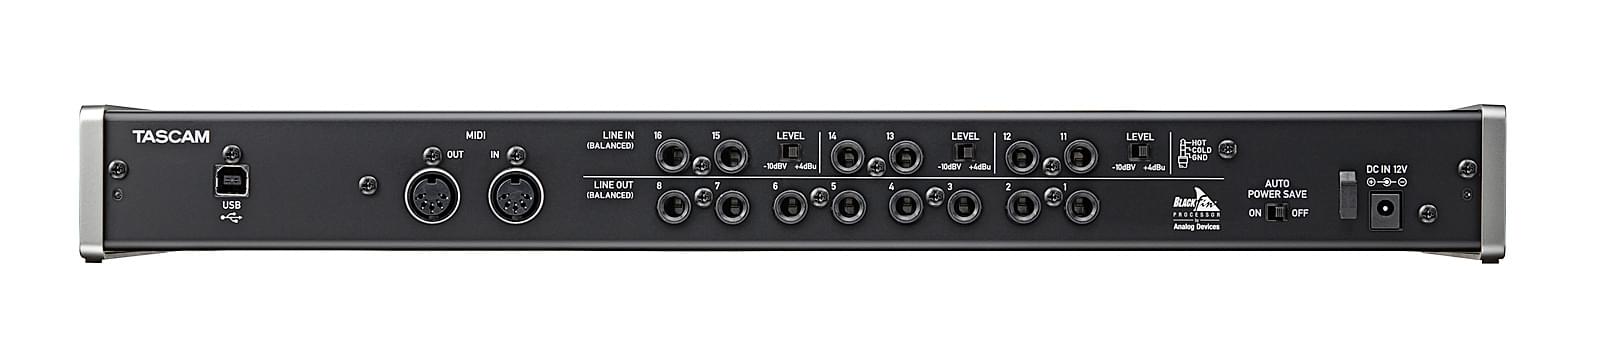 Tascam US-16x08 | USB Audio/MIDI Interface (16 in/8 out)